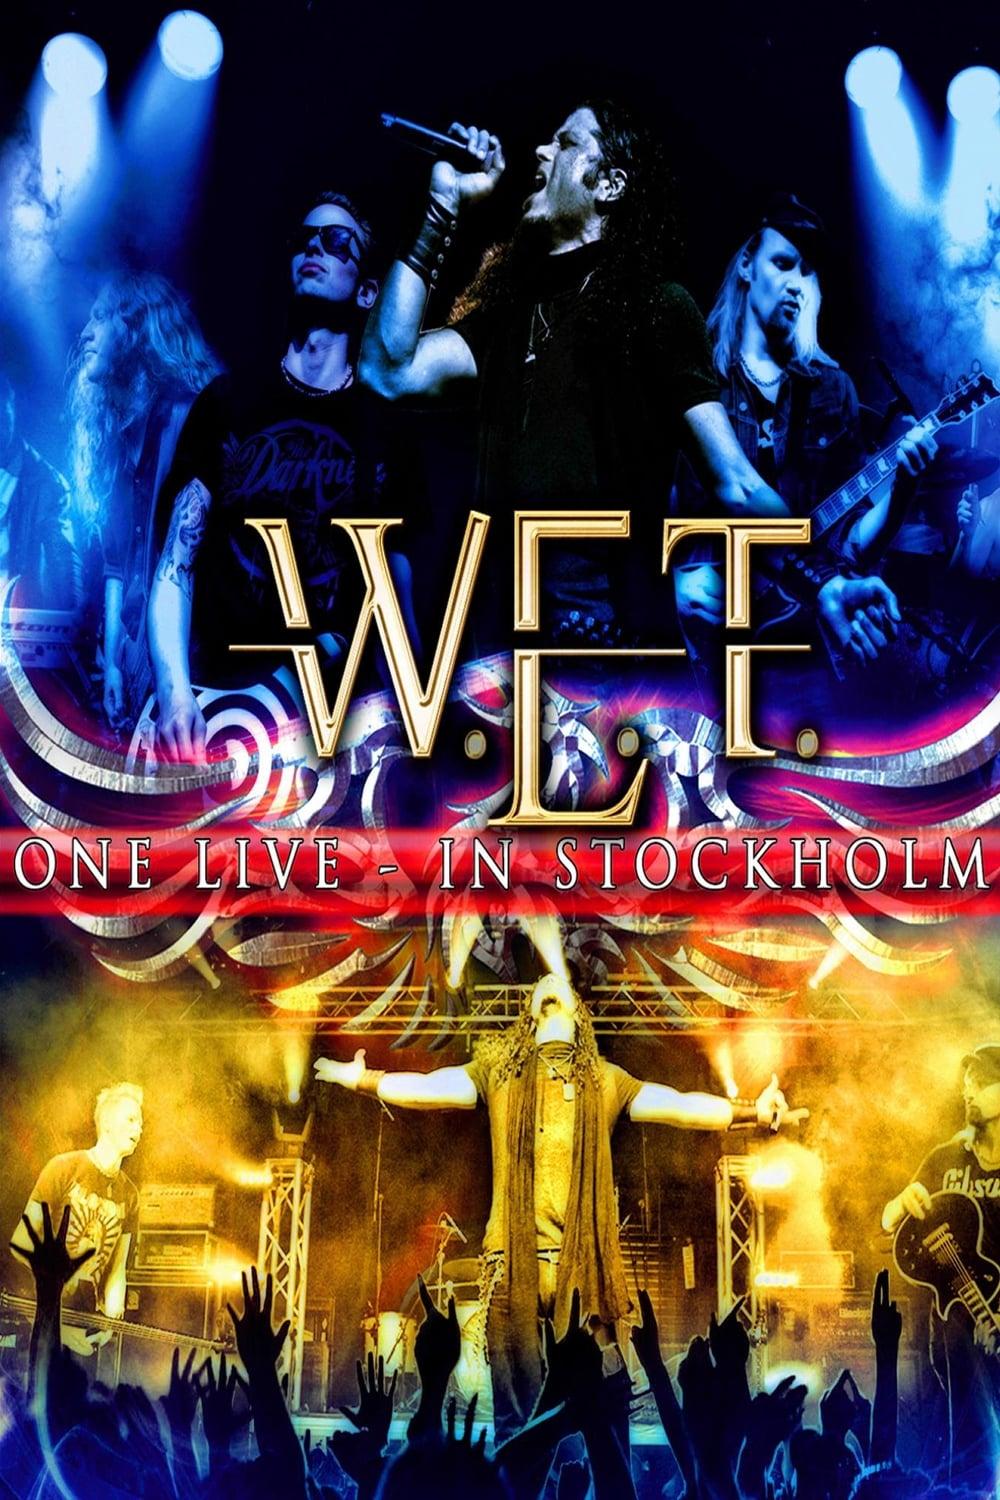 W.E.T - One Live in Stockholm poster